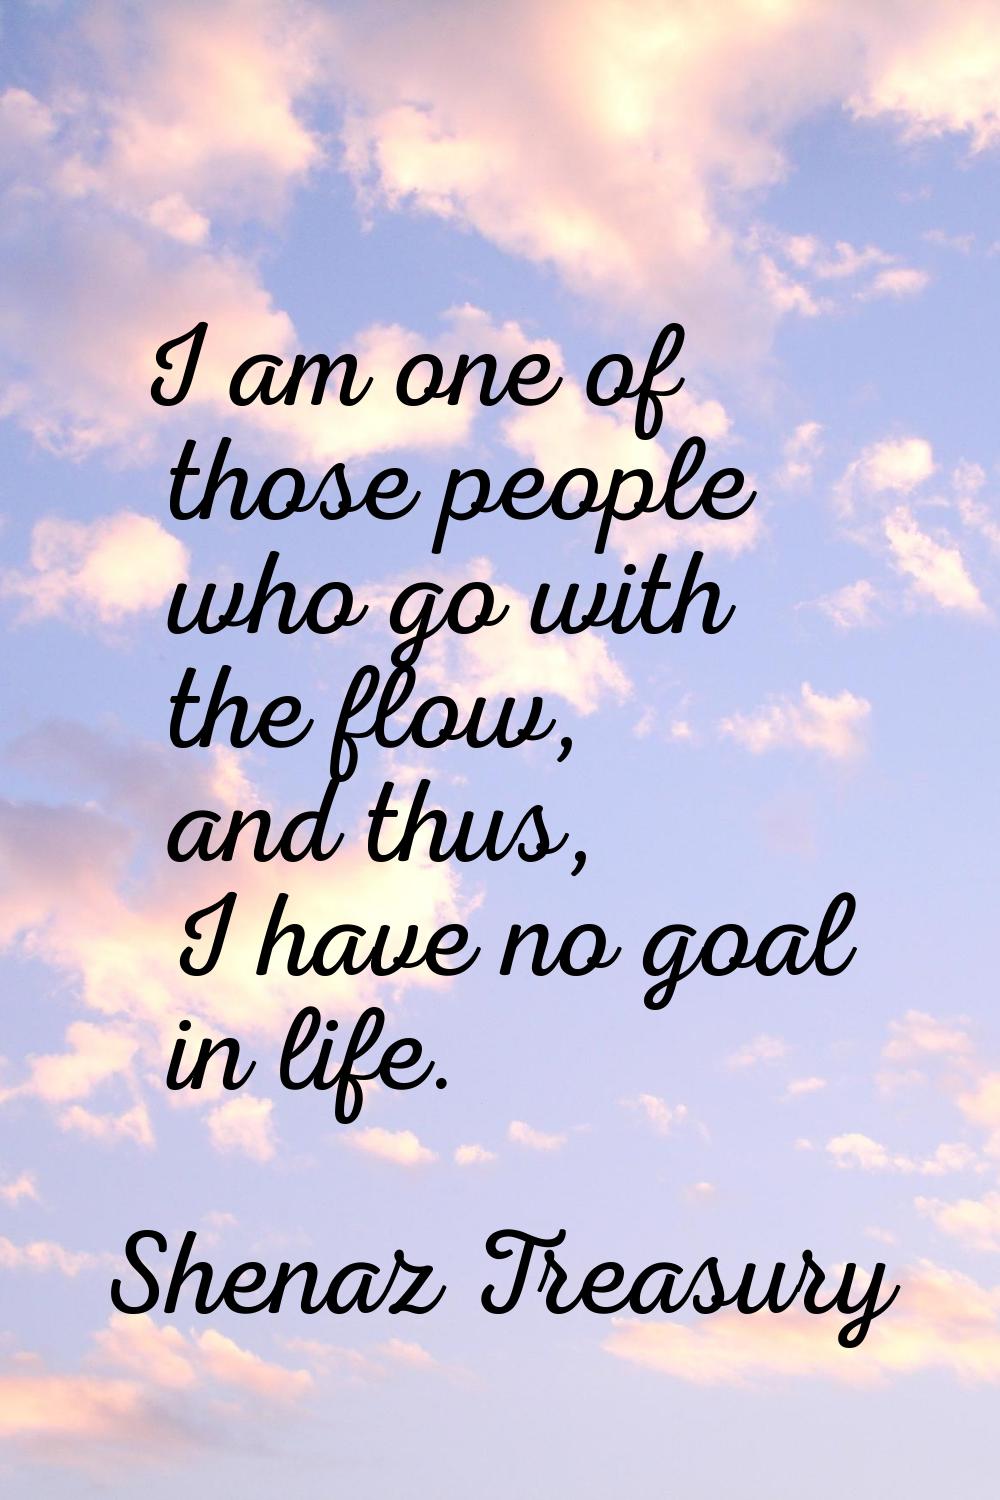 I am one of those people who go with the flow, and thus, I have no goal in life.